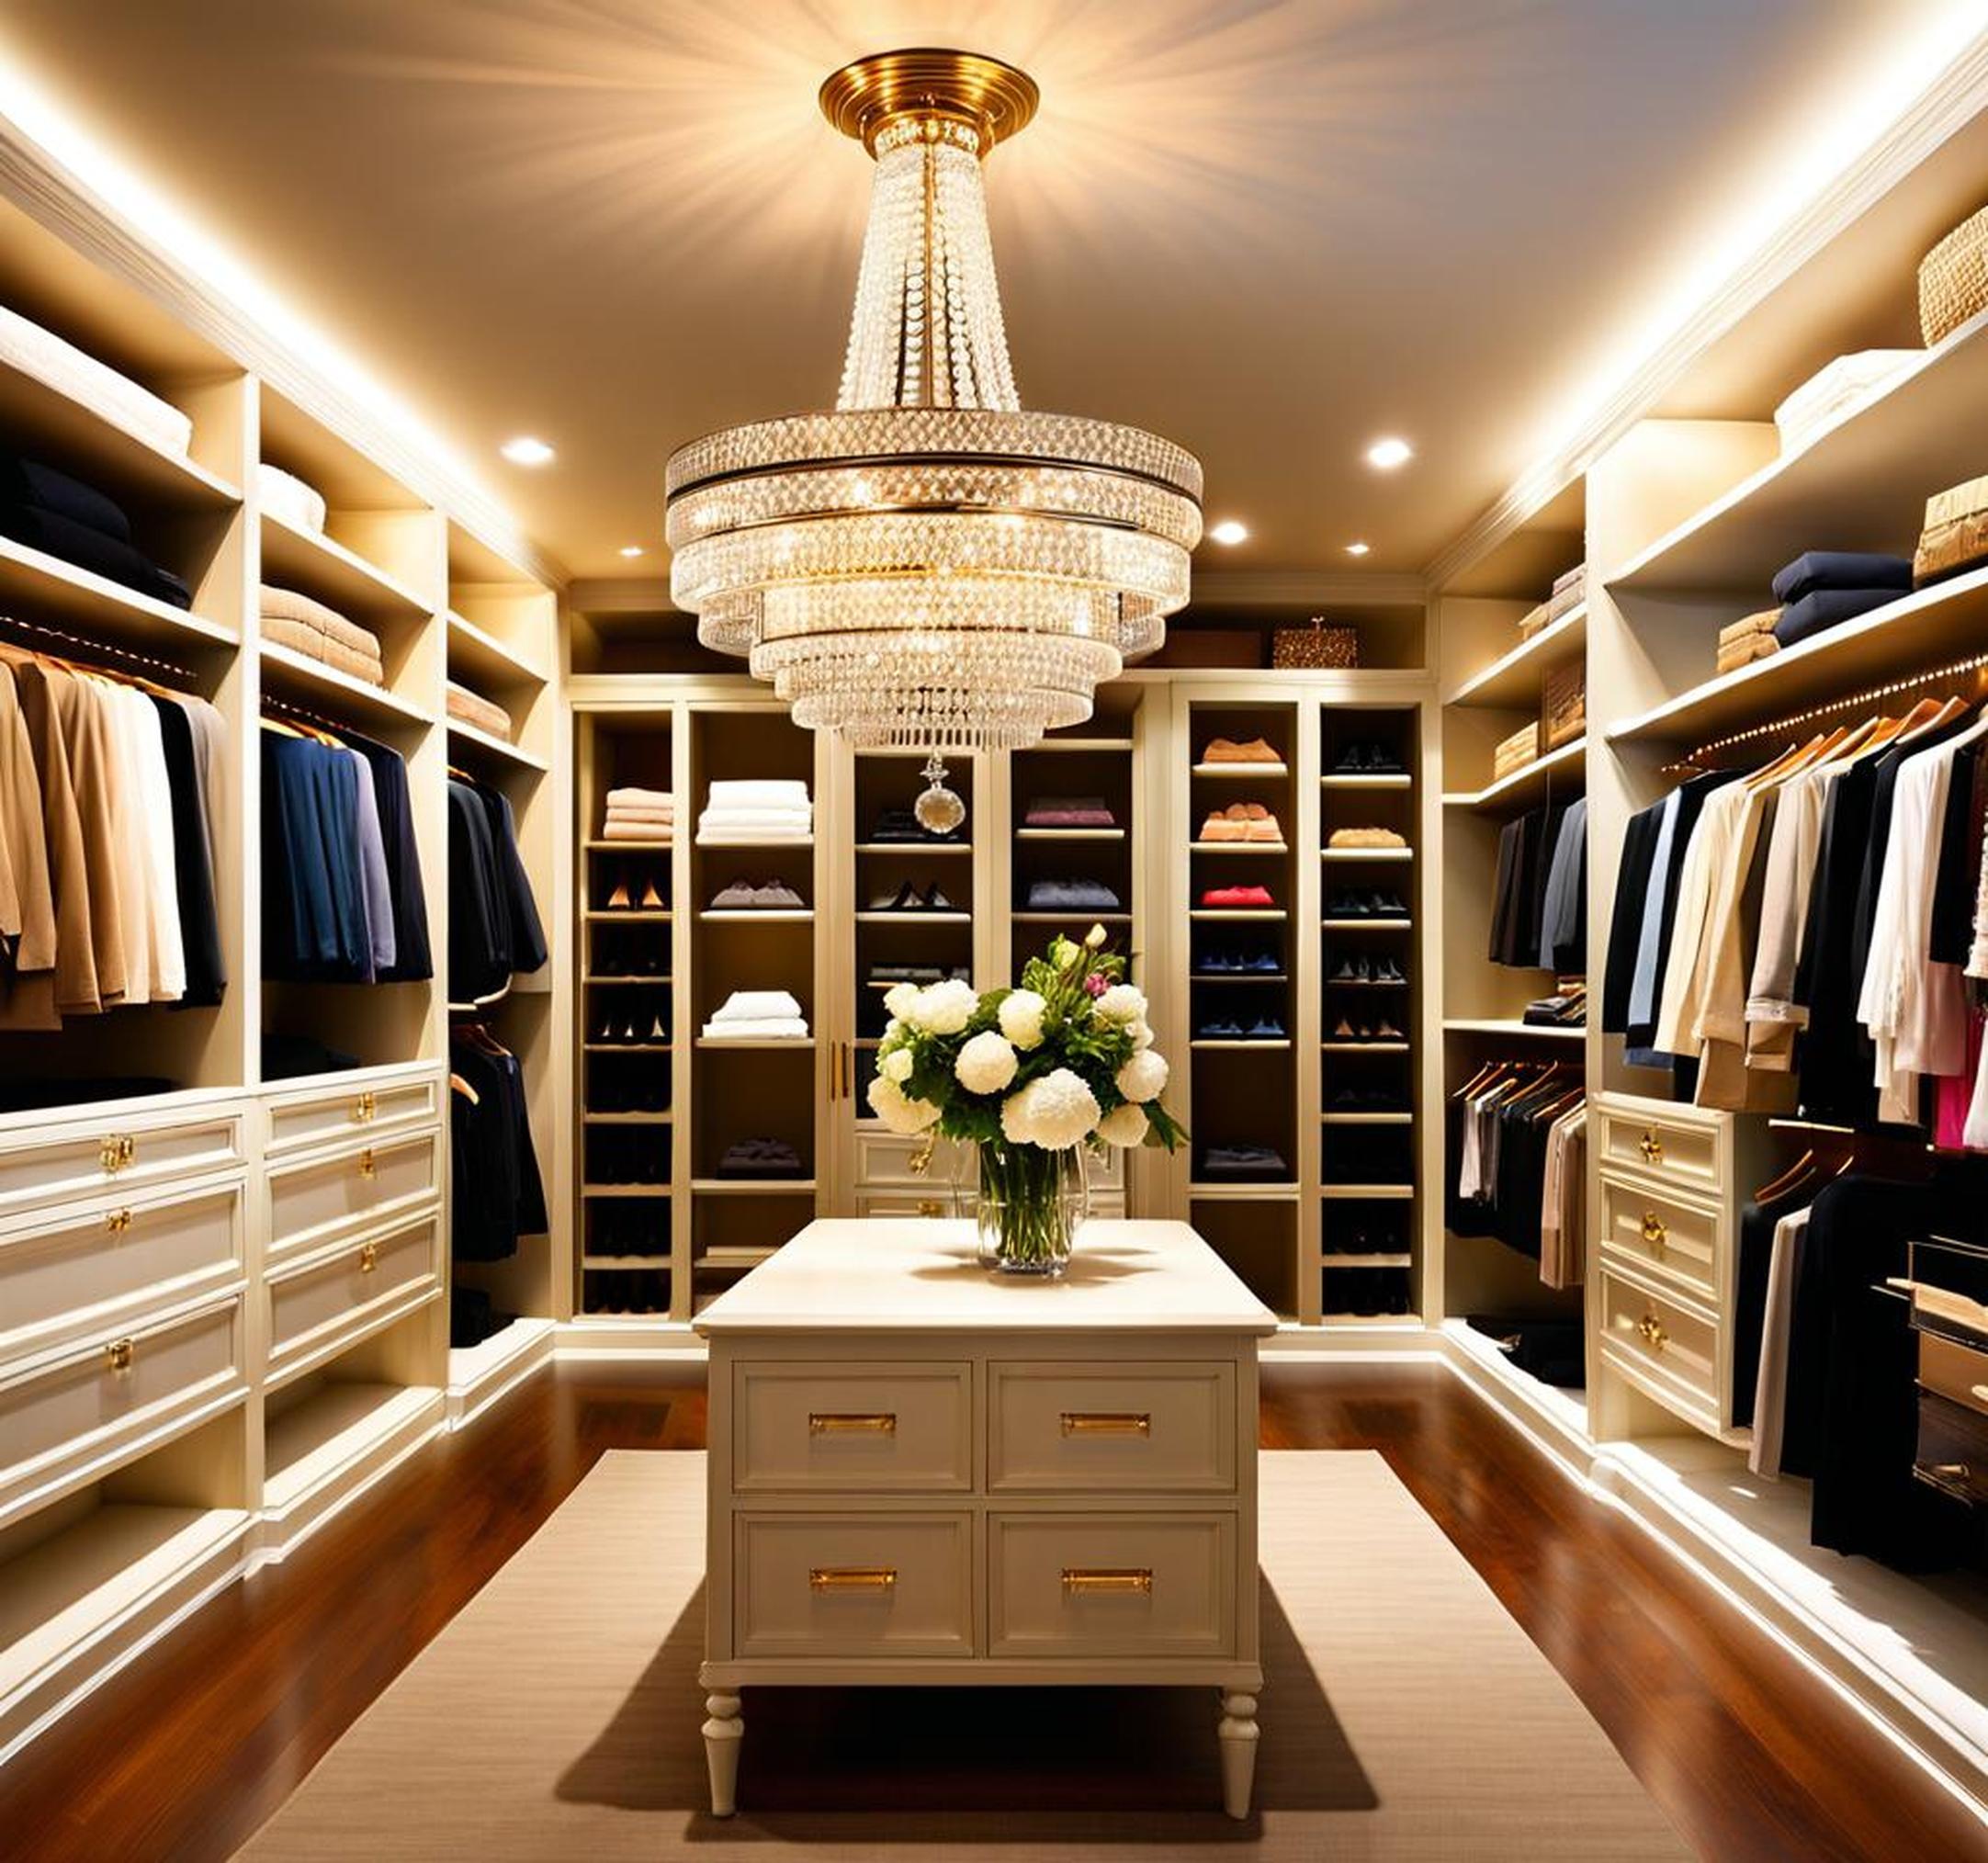 Find the Best Petite Chandeliers to Show Off Your Fabulous Closet